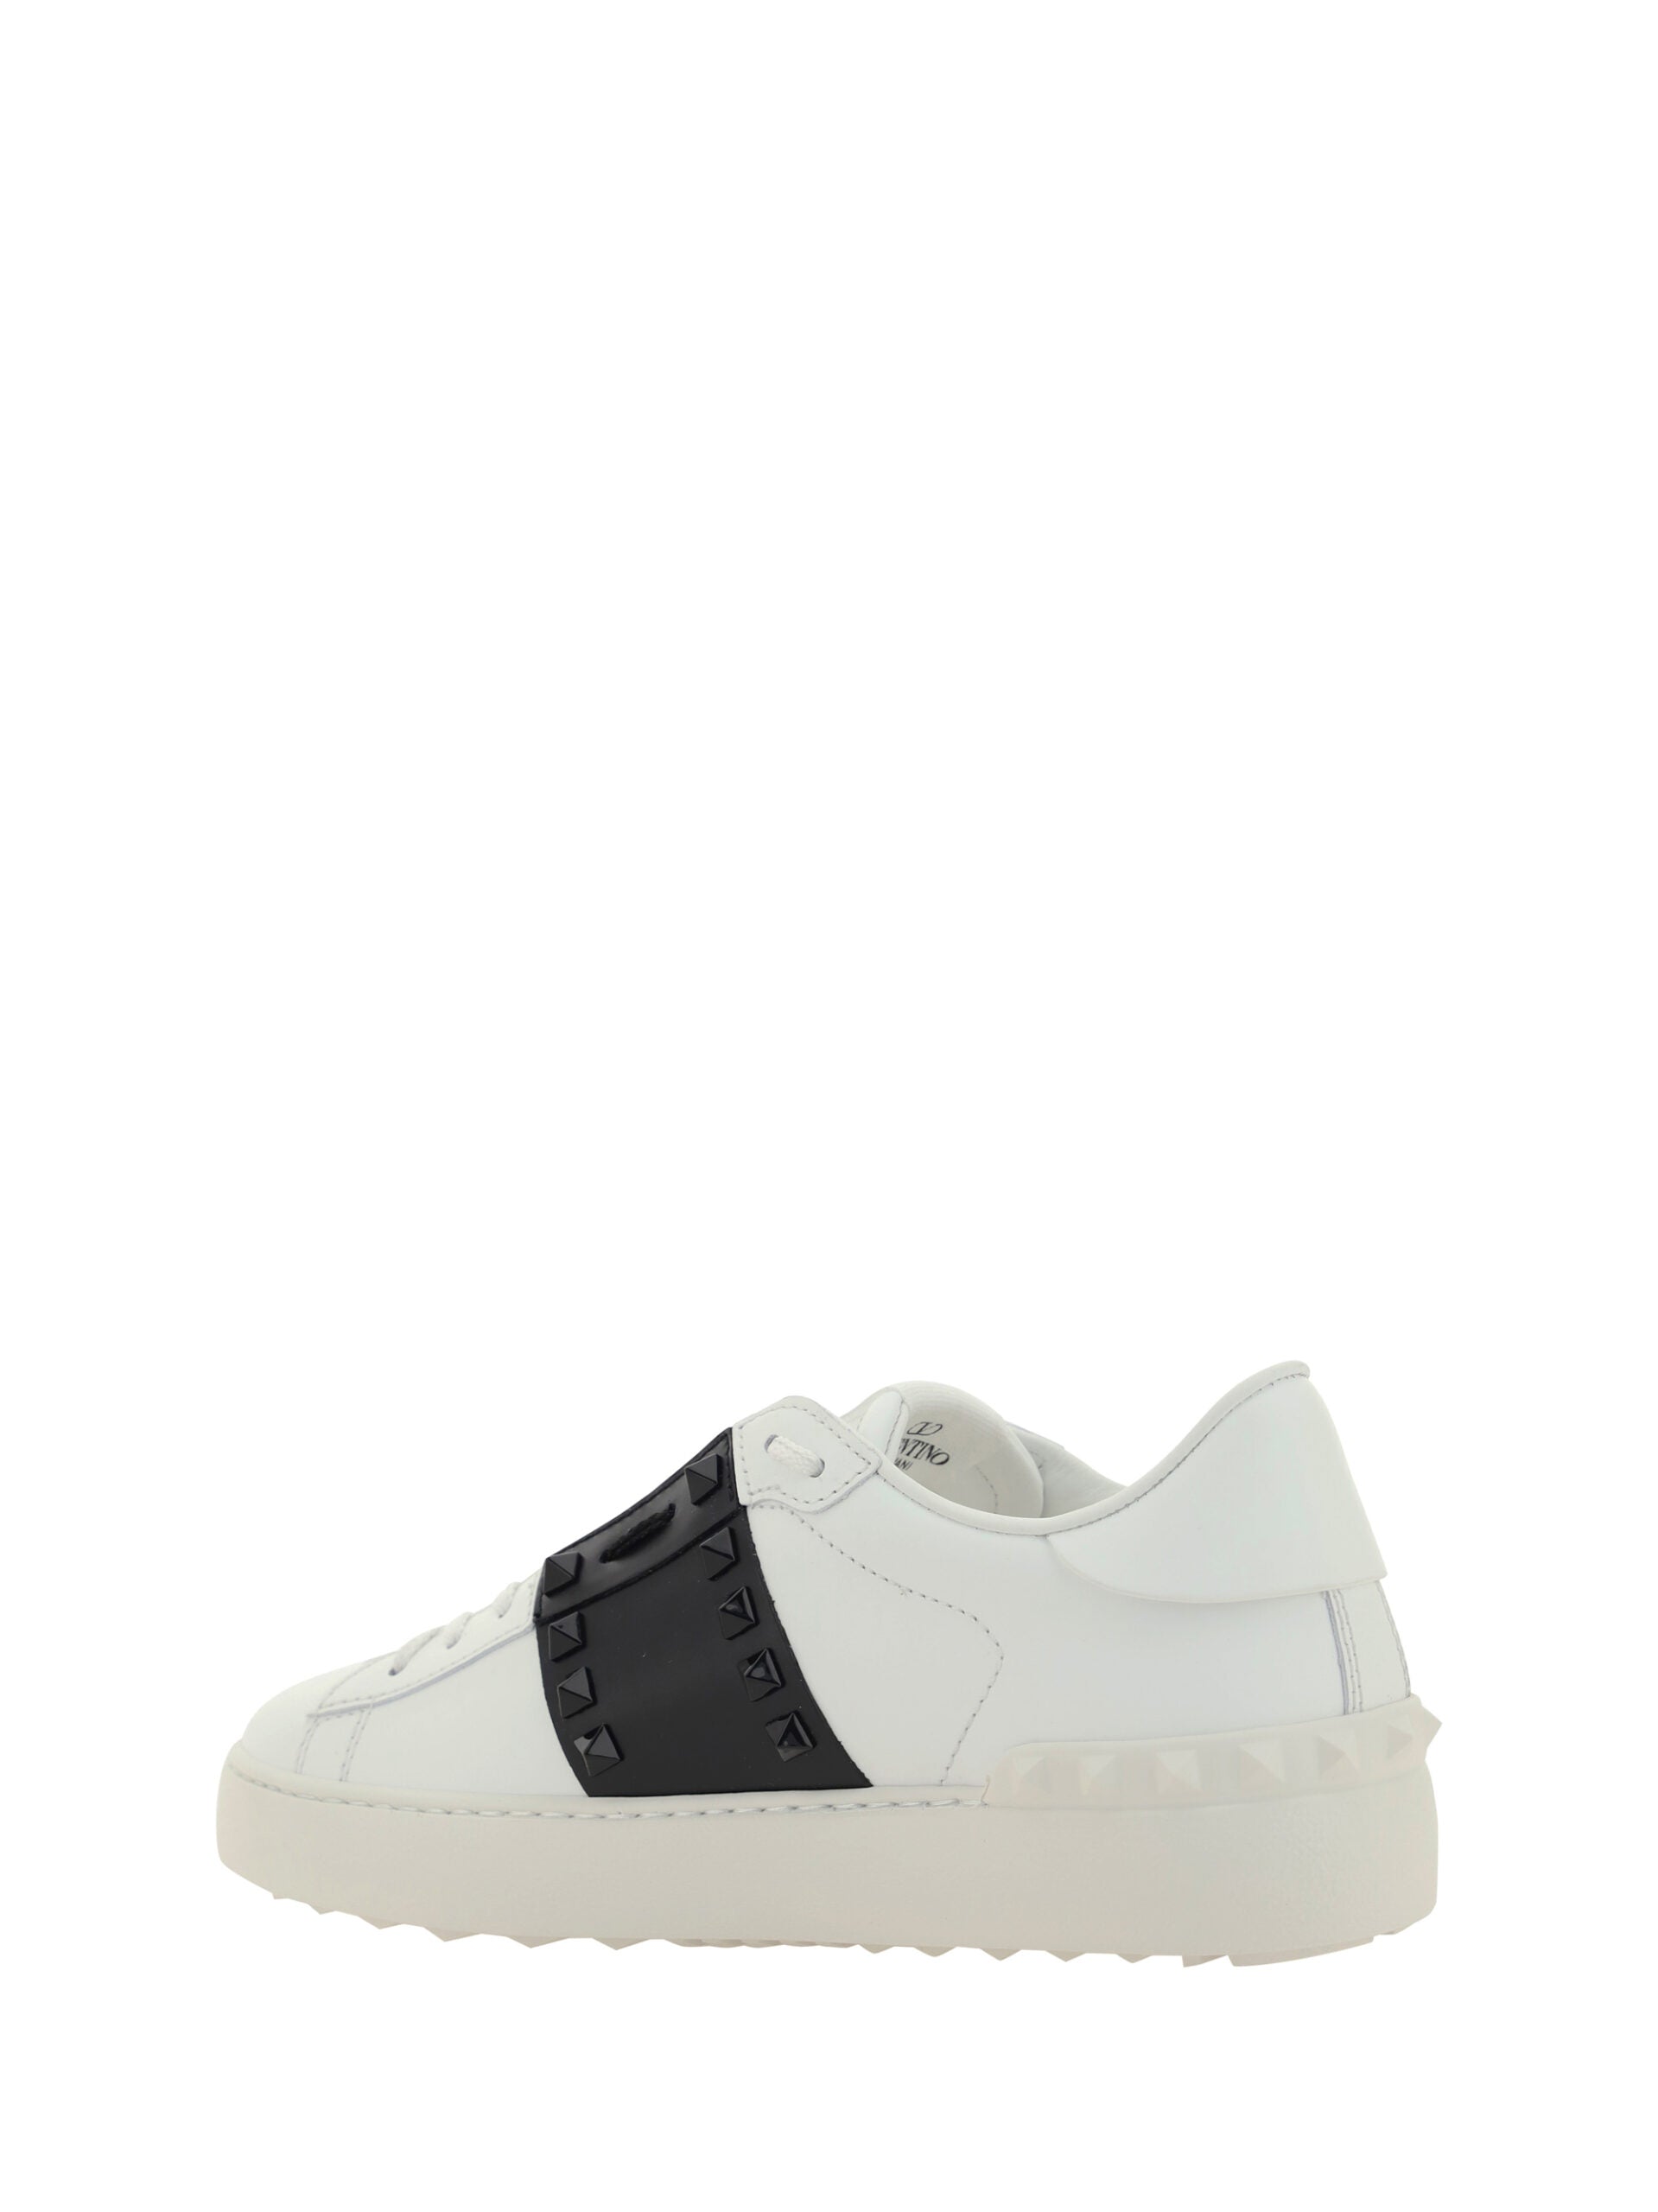 Valentino White and Black Calf Leather Sneakers